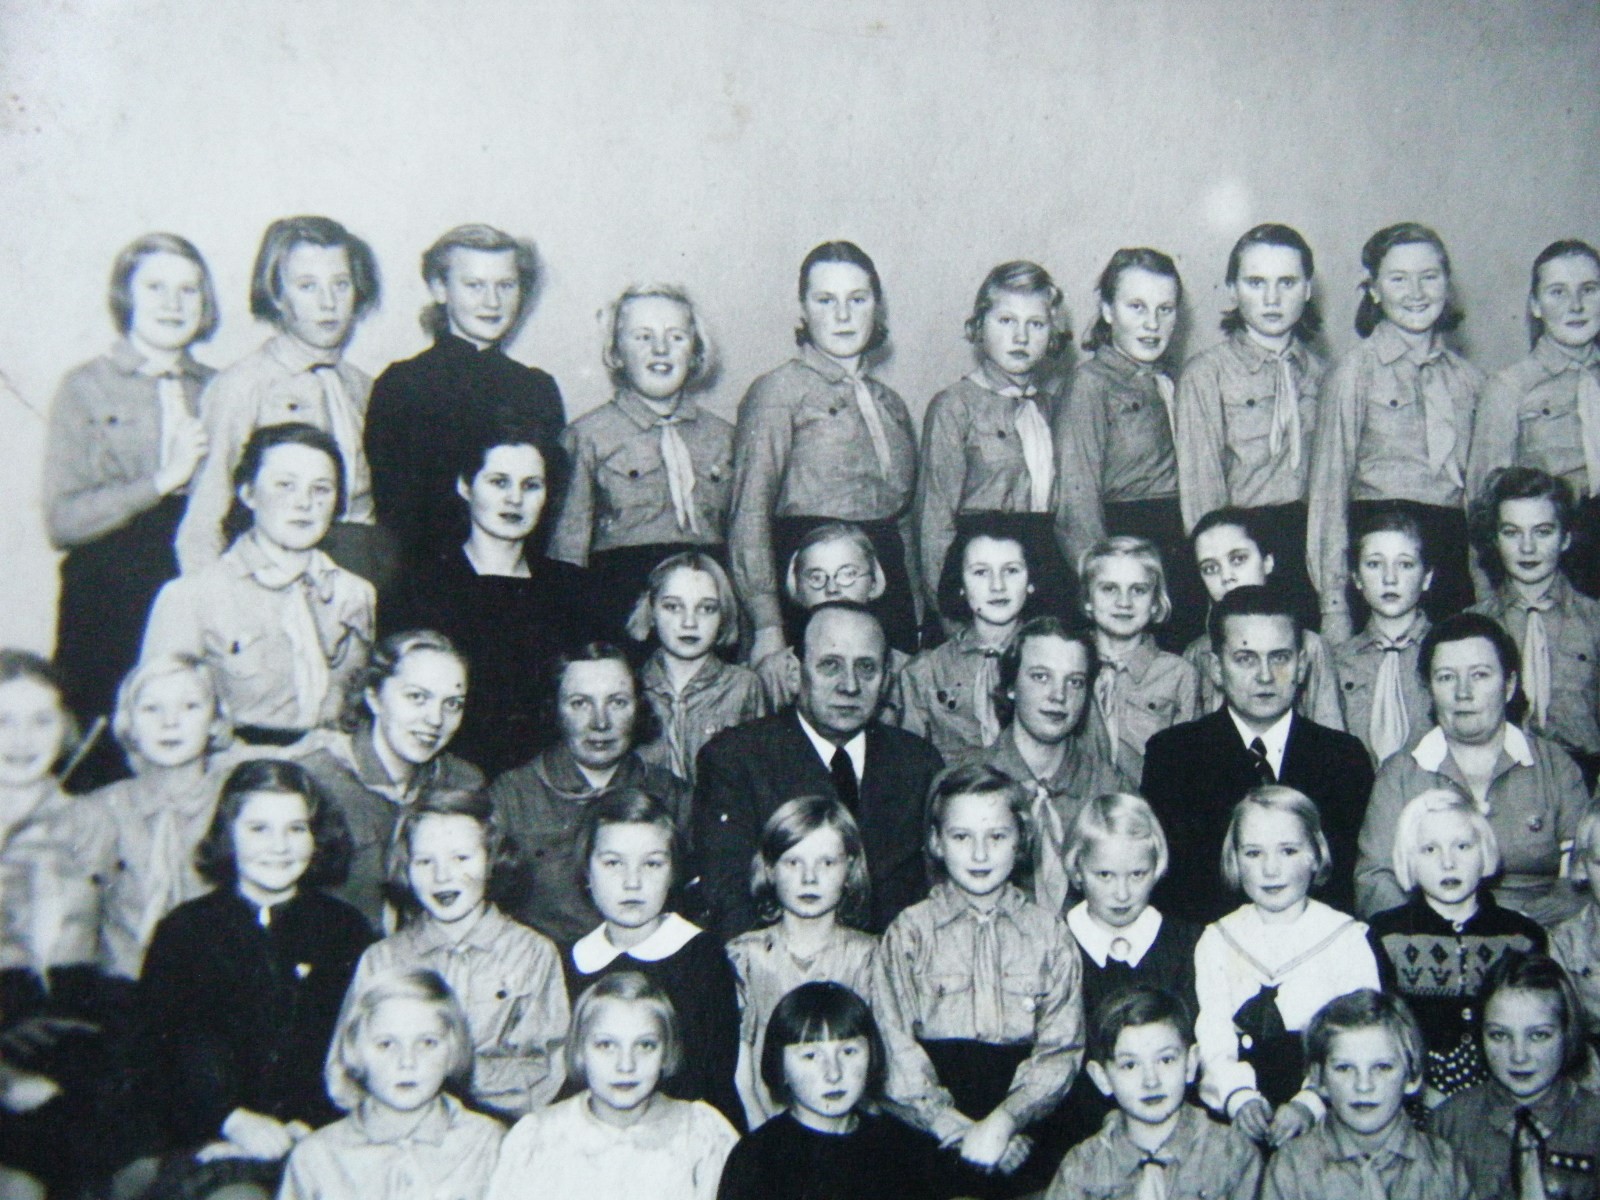 Tartu home girls. On the left in the third row, the second Silvia-Agathe Brant. The photo also includes her non-formal classic sister Asta Vihandi